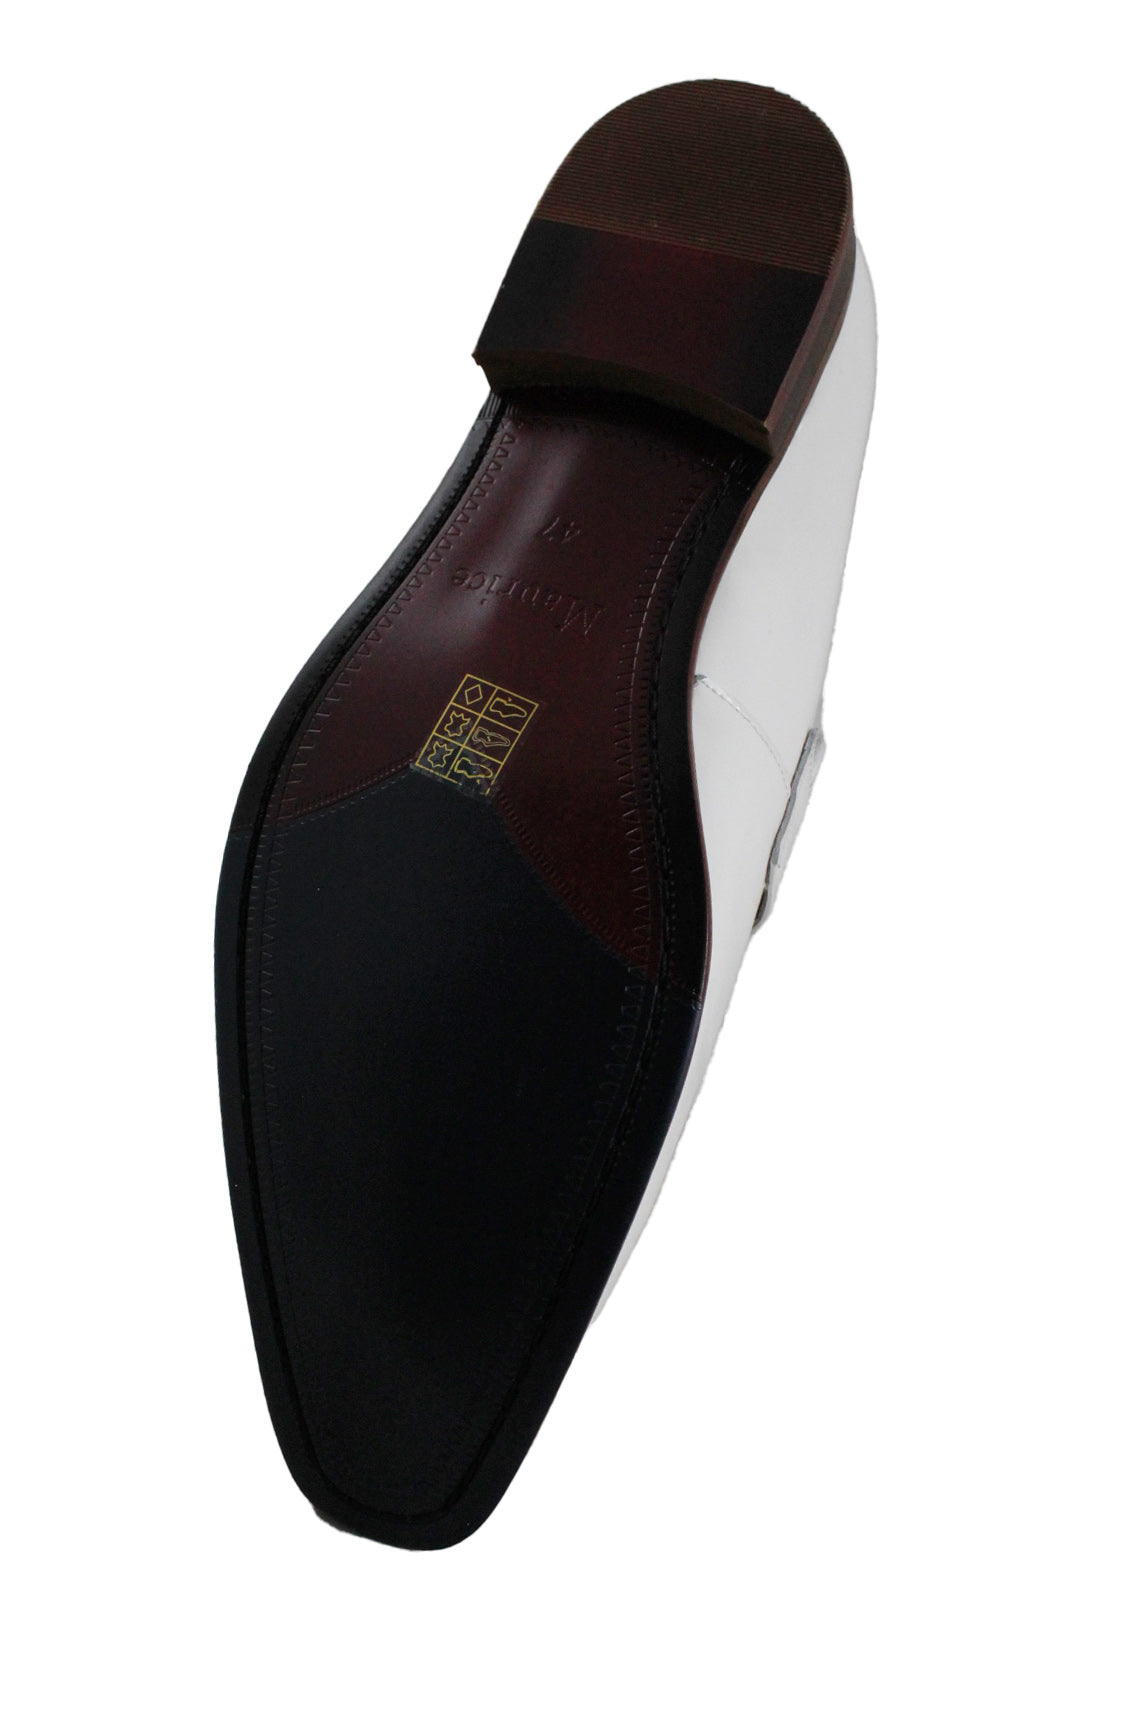 bottom angle maurice by jc studio white penny loafers featuring contrast sole, 1" stacked heel, materials sticker, and 'maurice', '47' text at sole.